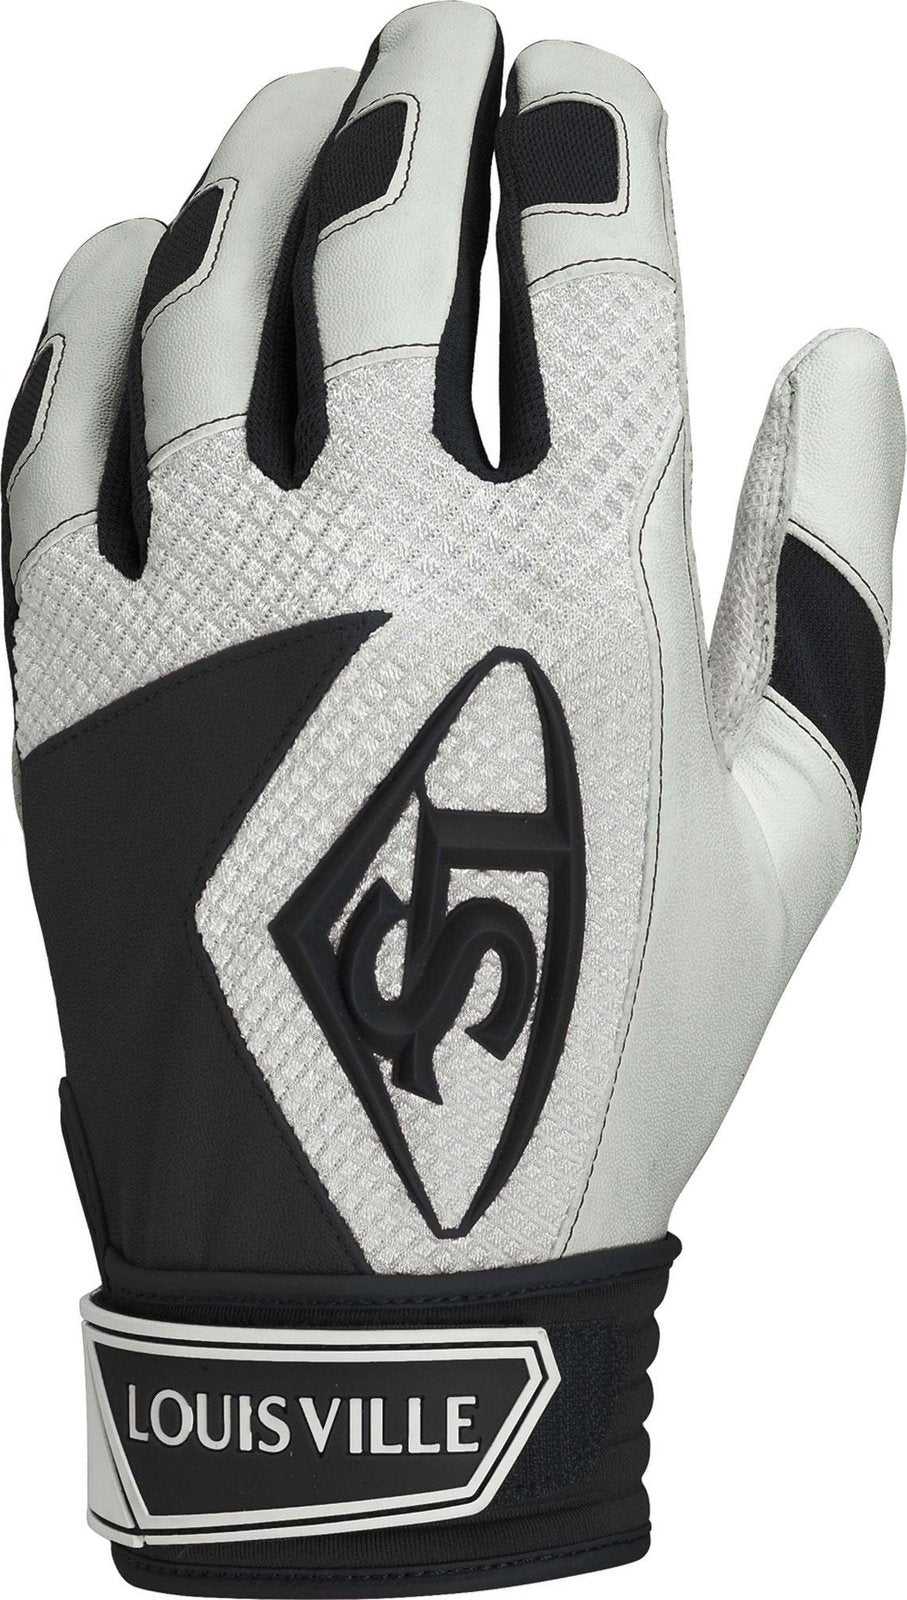 Louisville Slugger Series 7 Youth Batting Gloves - Black - HIT A Double